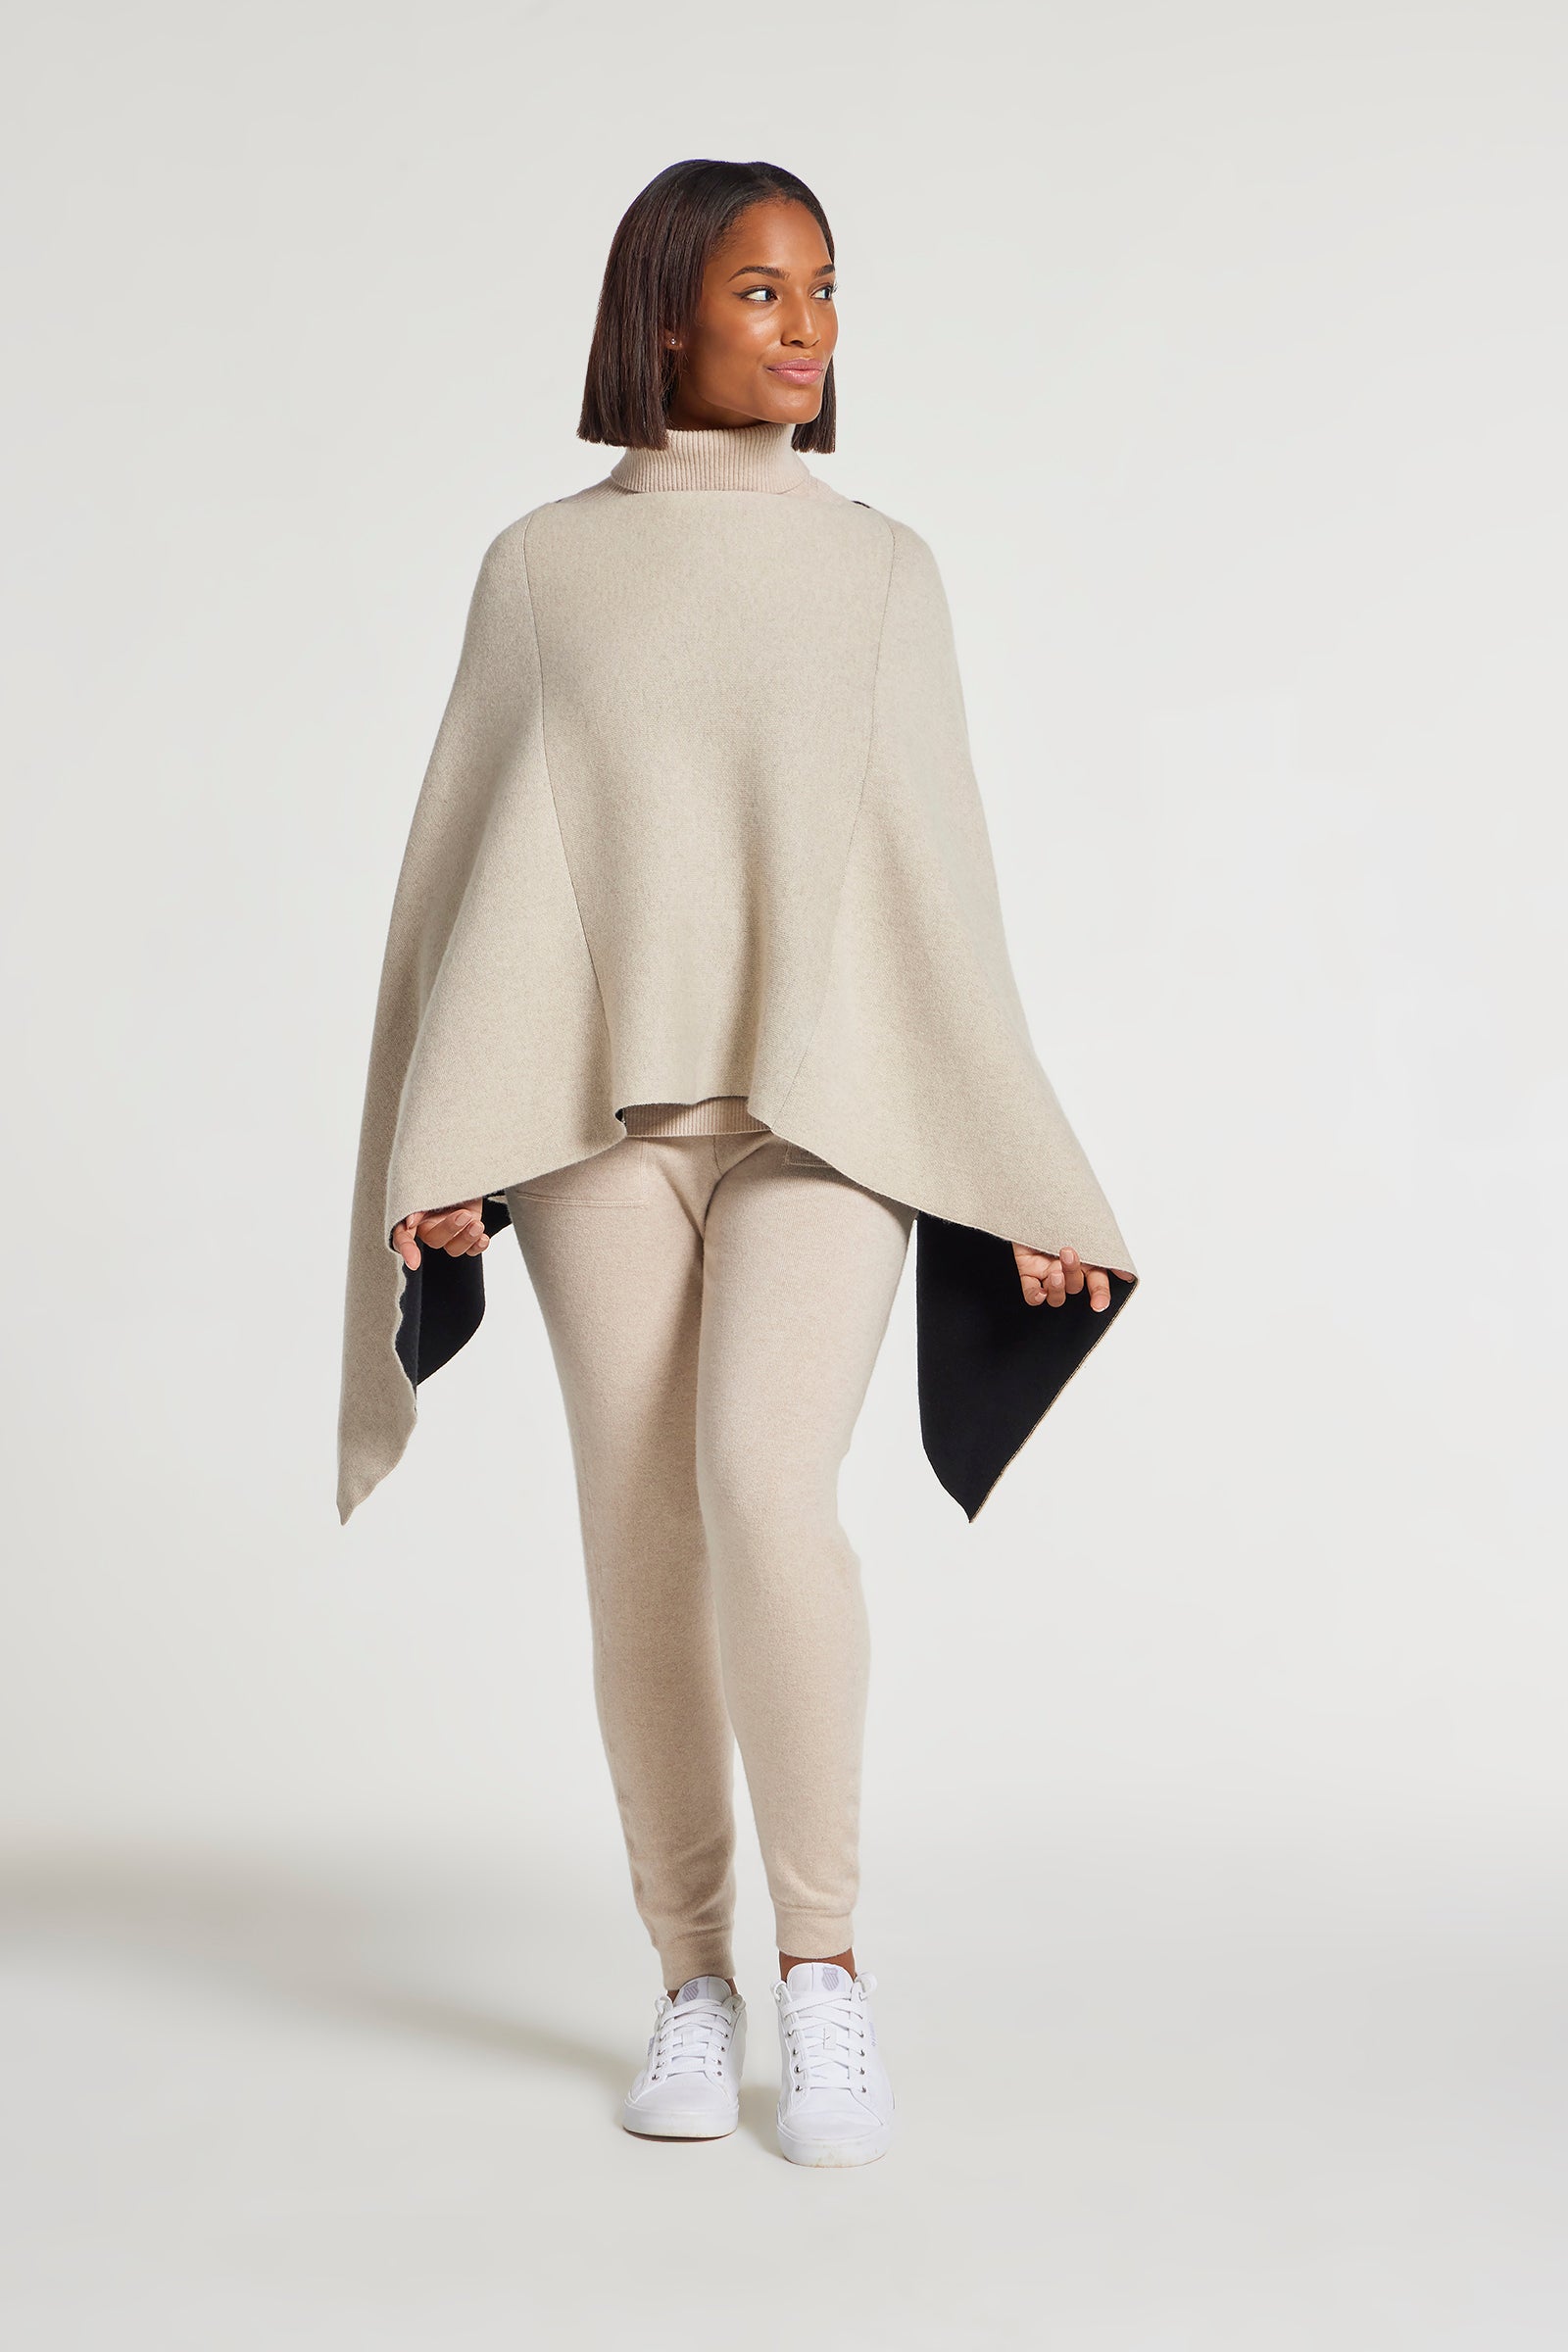 Anatomie Reversible Cashmere in Oatmeal/Black